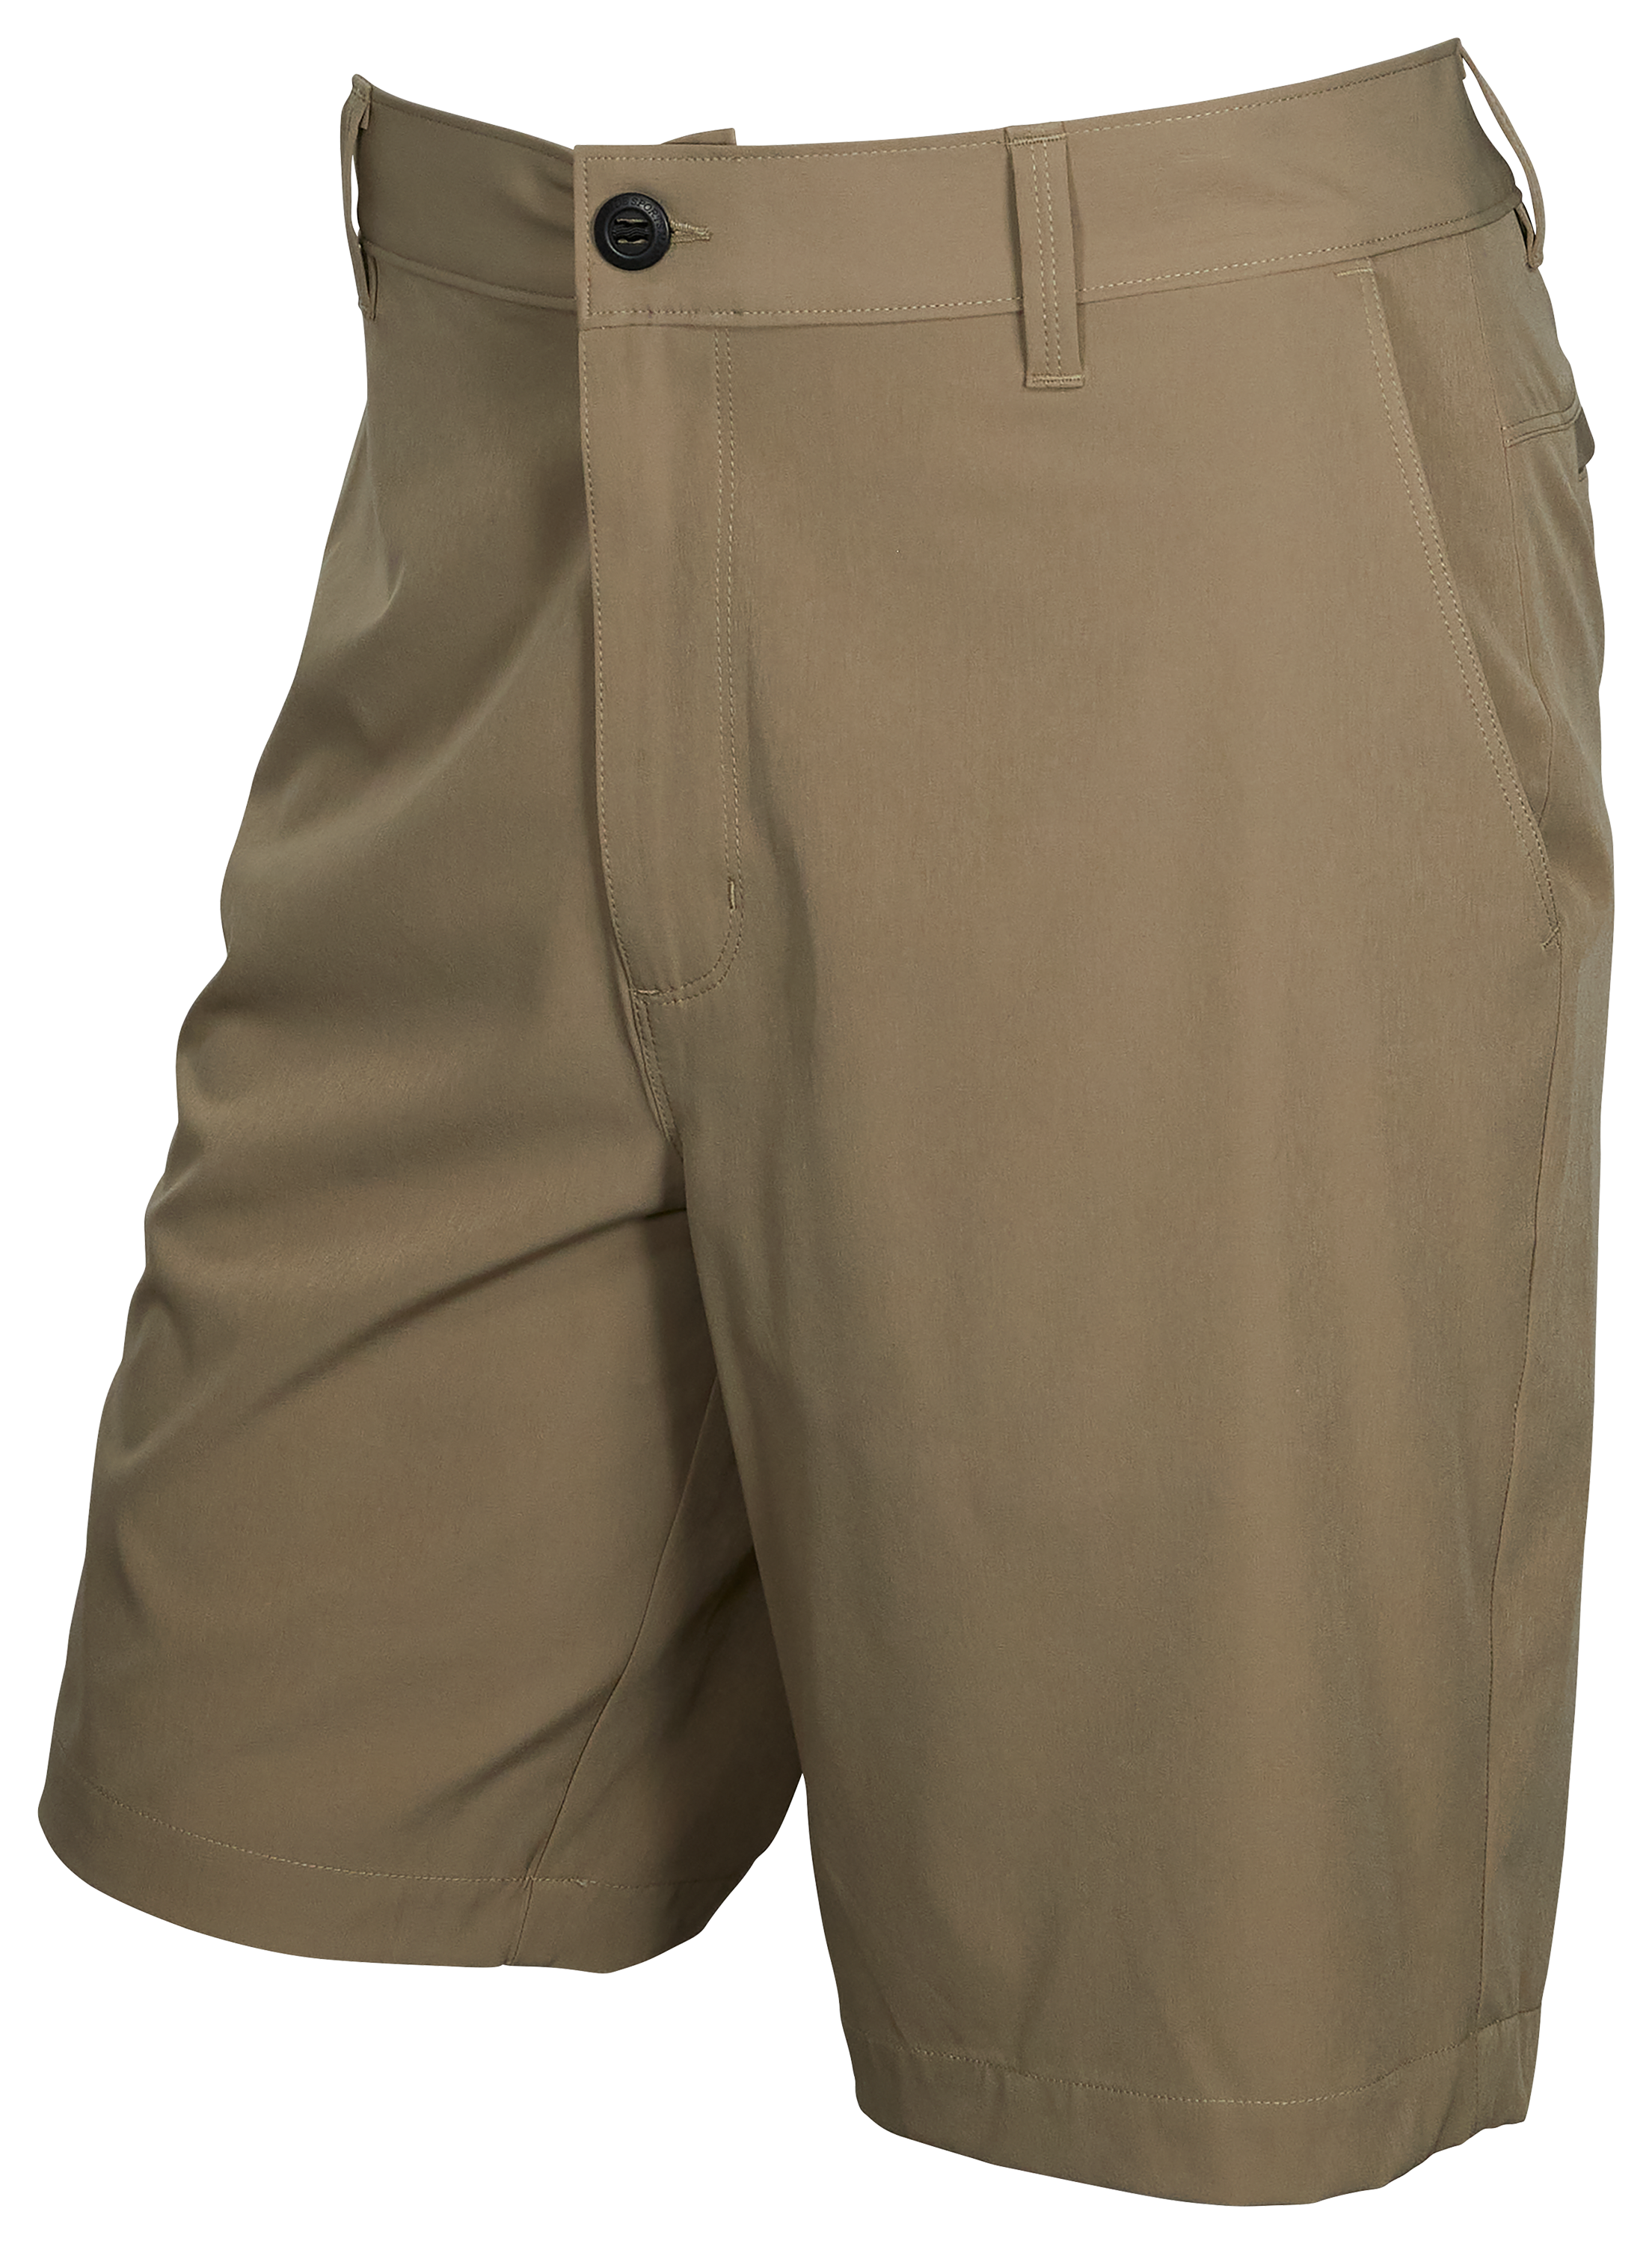 World Wide Sportsman Pescador Stretch Fishing Shorts for Men - Timber - 44